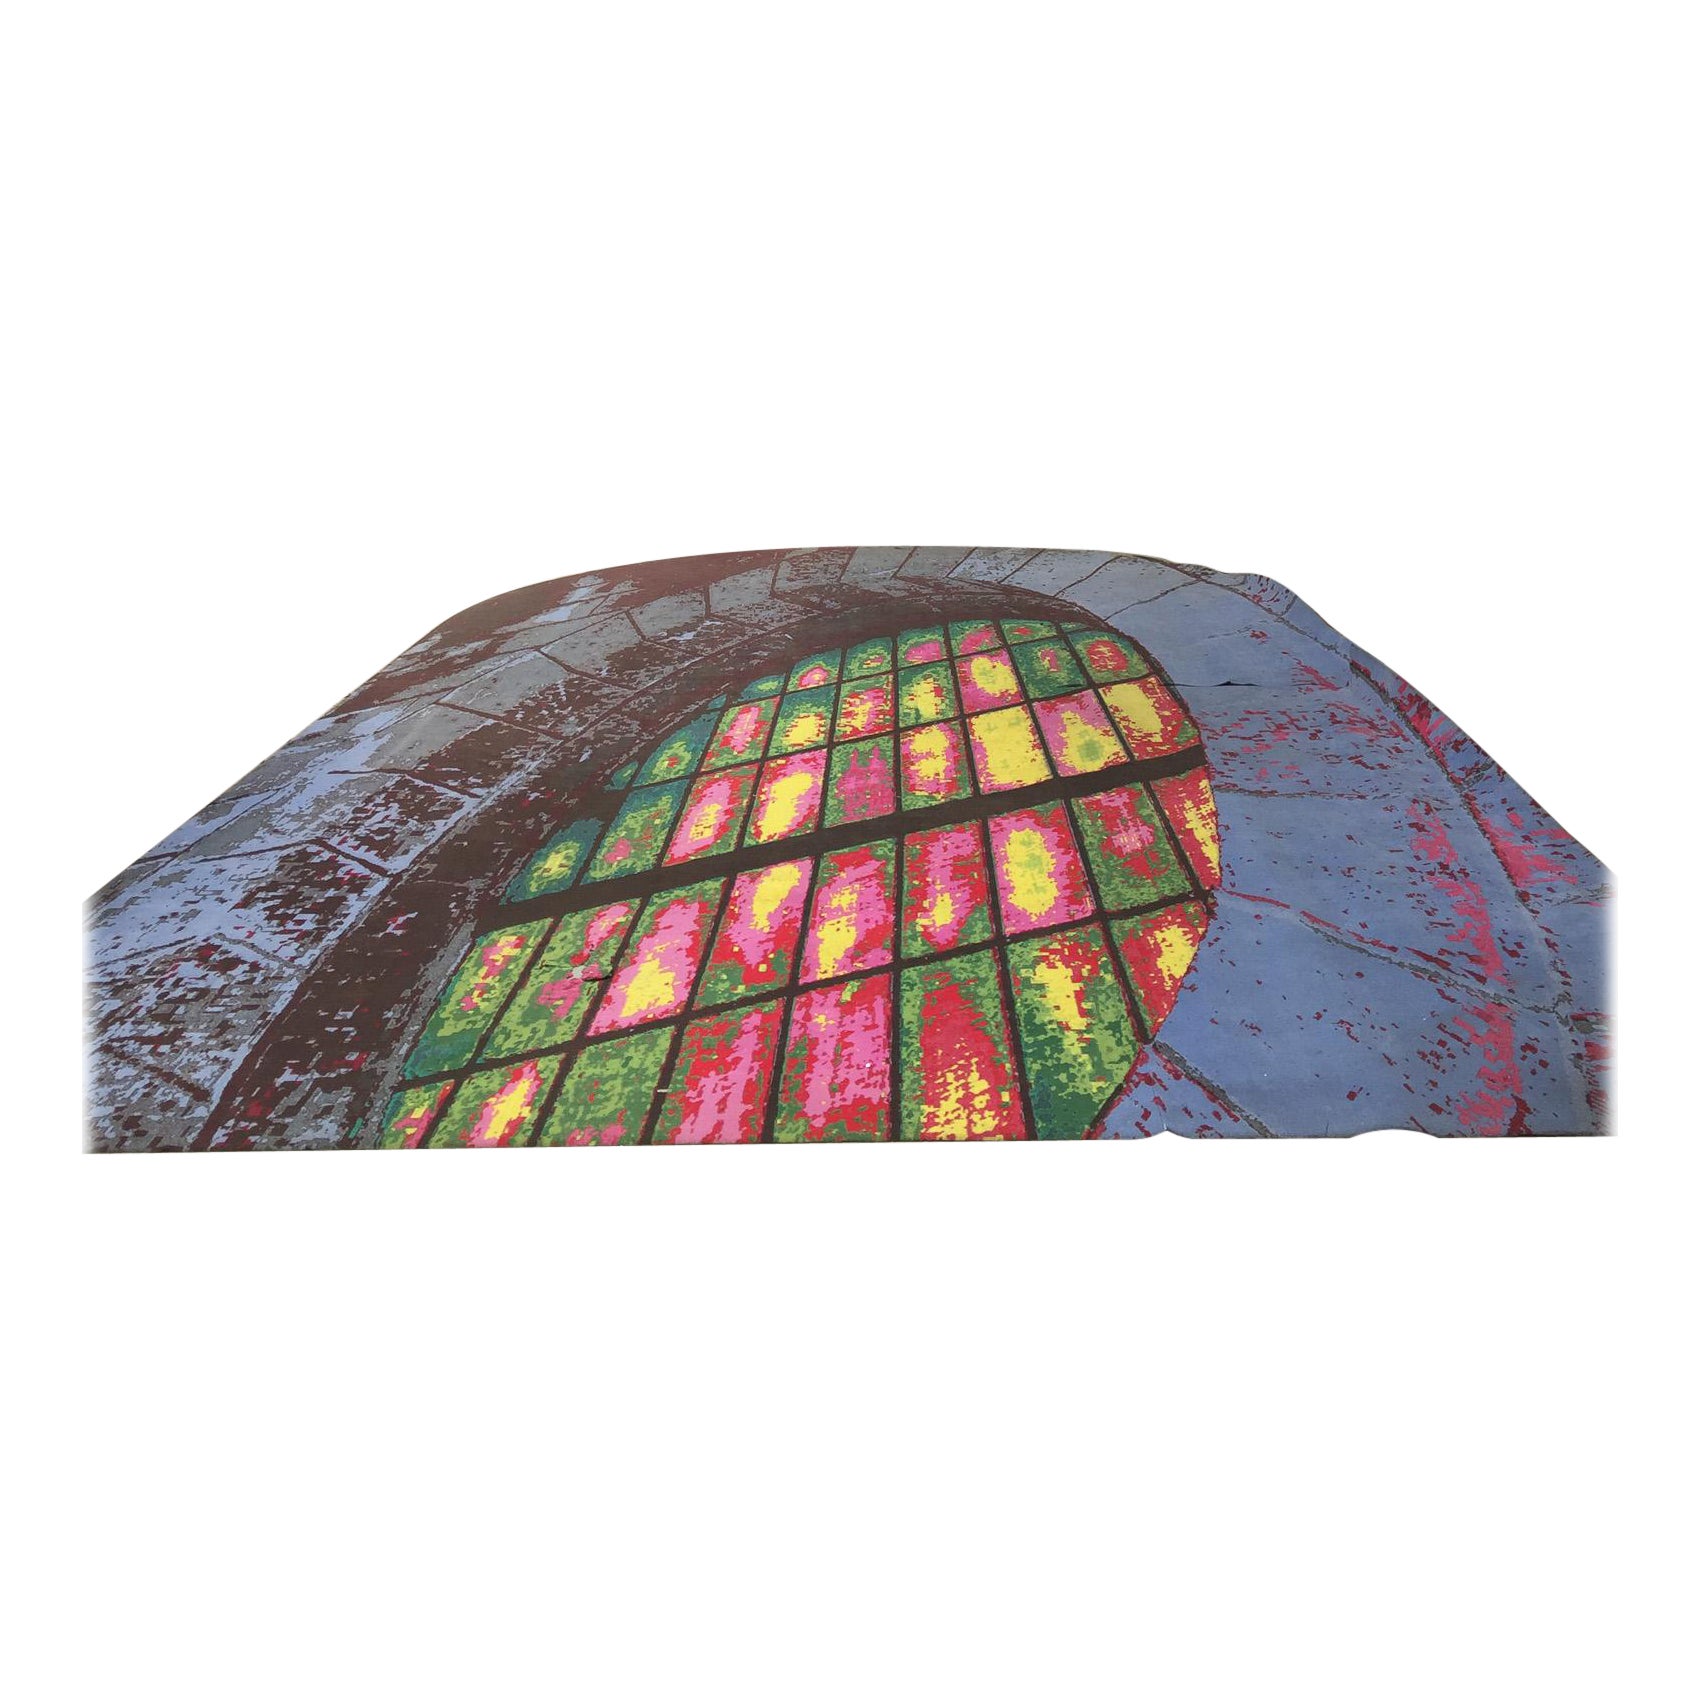 XXL Carpet from a Church Abstract Stained glass For Sale